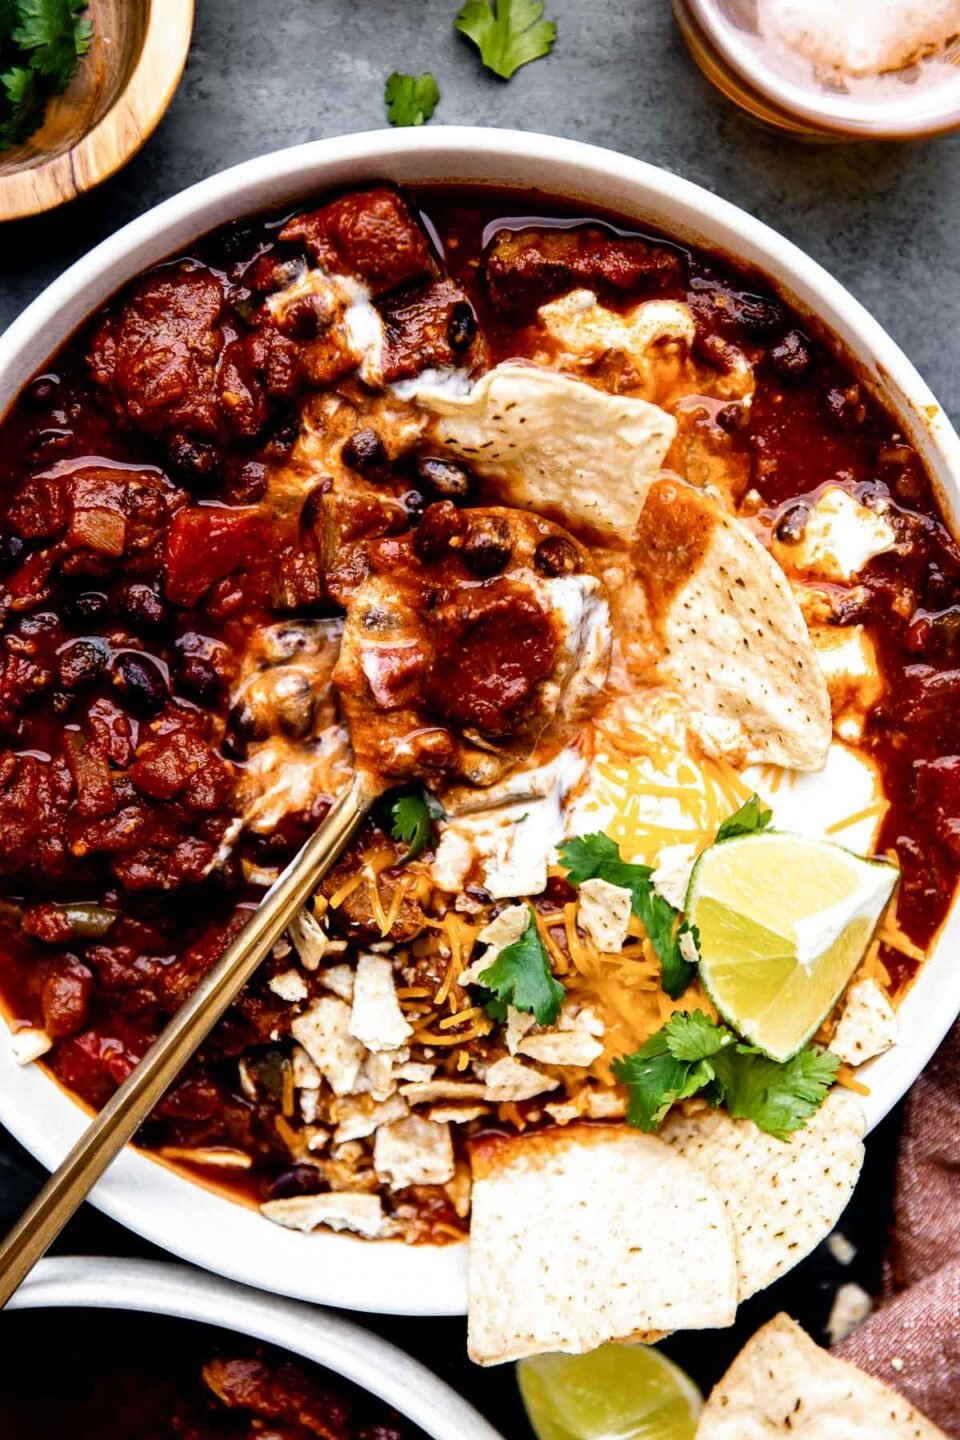 Beef chili is served inside of a white bowl that sits atop a dark textured surface. The chili with stew meat has been topped with a dollop of sour cream, whole and crushed tortilla chips, fresh cilantro, shredded cheese and a lime wedge. A gold spoon rests inside of the bowl with a spoonful of chili scooped on top. The bowl is surrounded by a burnt orange colored linen napkin, loose fresh cilantro, a cut lime half, loose tortilla chips, an amber colored drinking glass, and a second white bowl filled with beef chili.